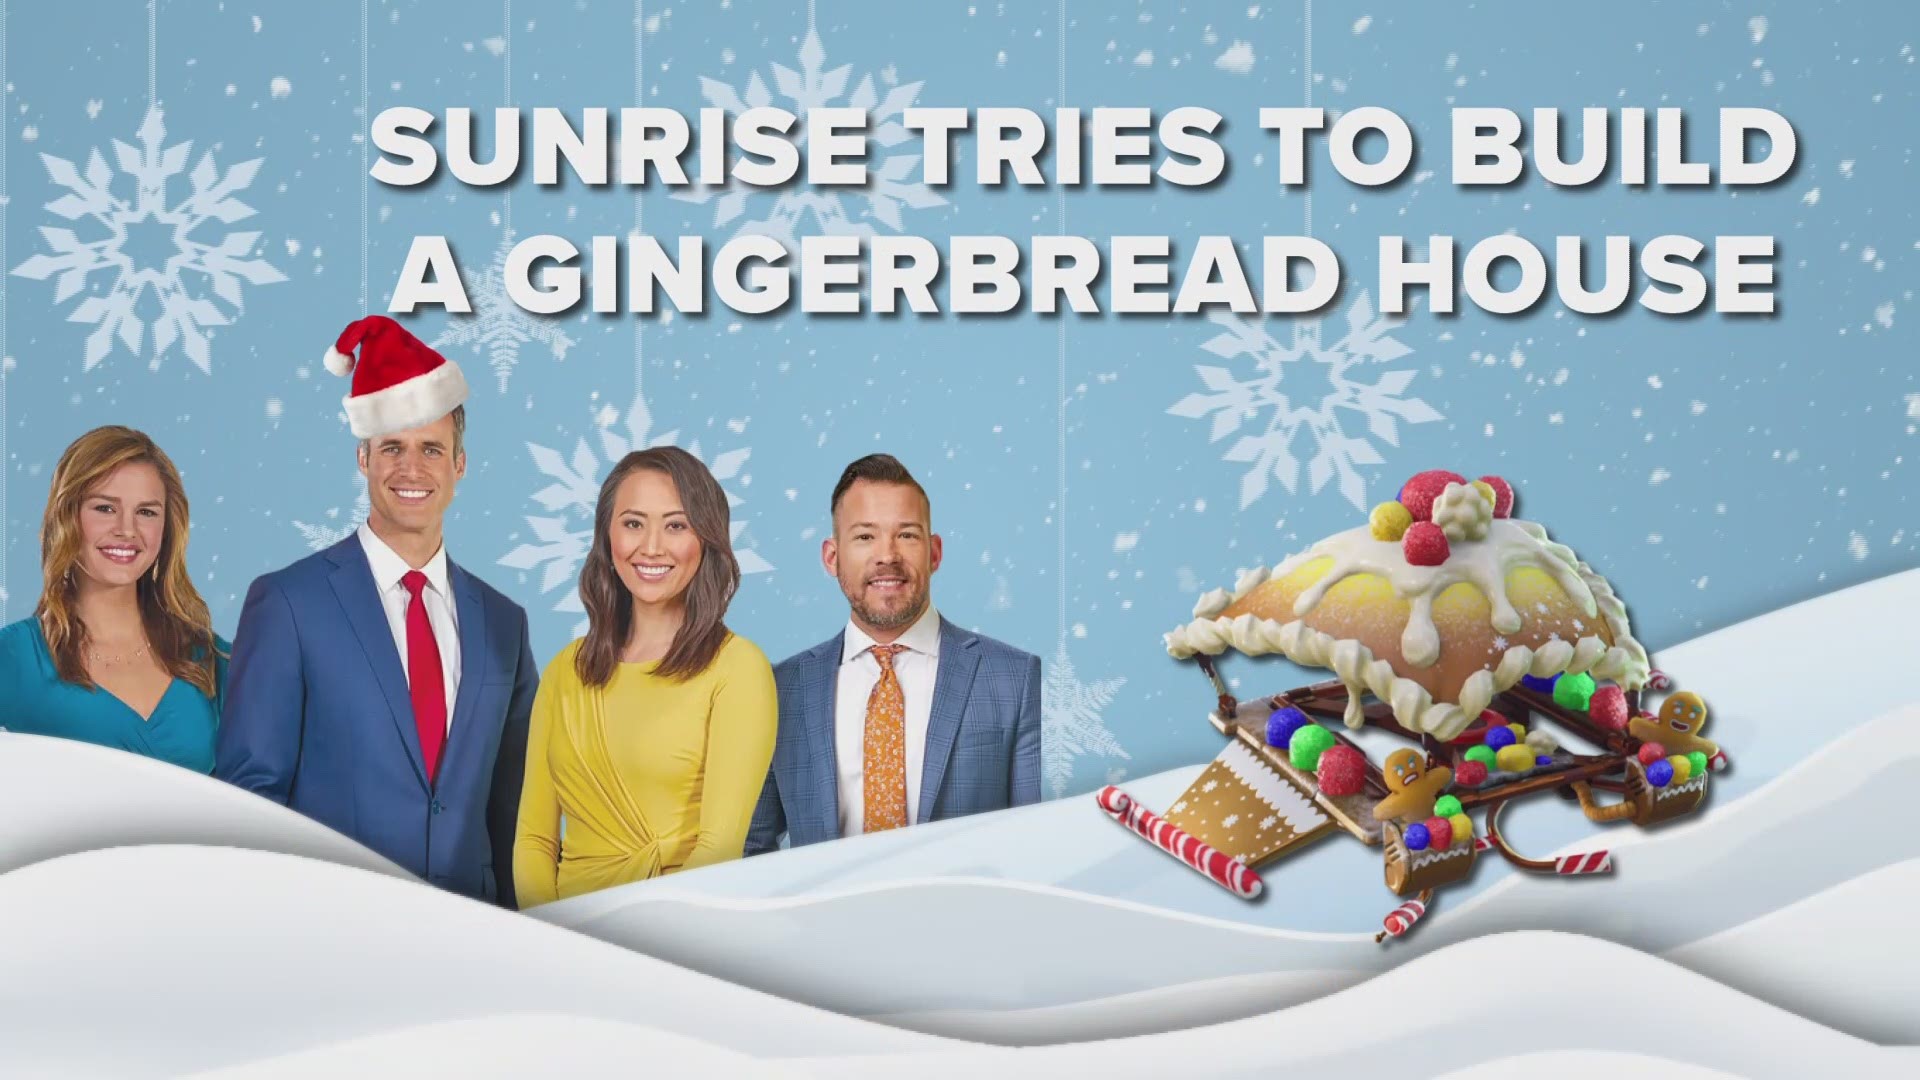 Kris, Gia, Alicia and Sven team up to build some festive gingerbread houses. Unfortunately, things don't go so well!